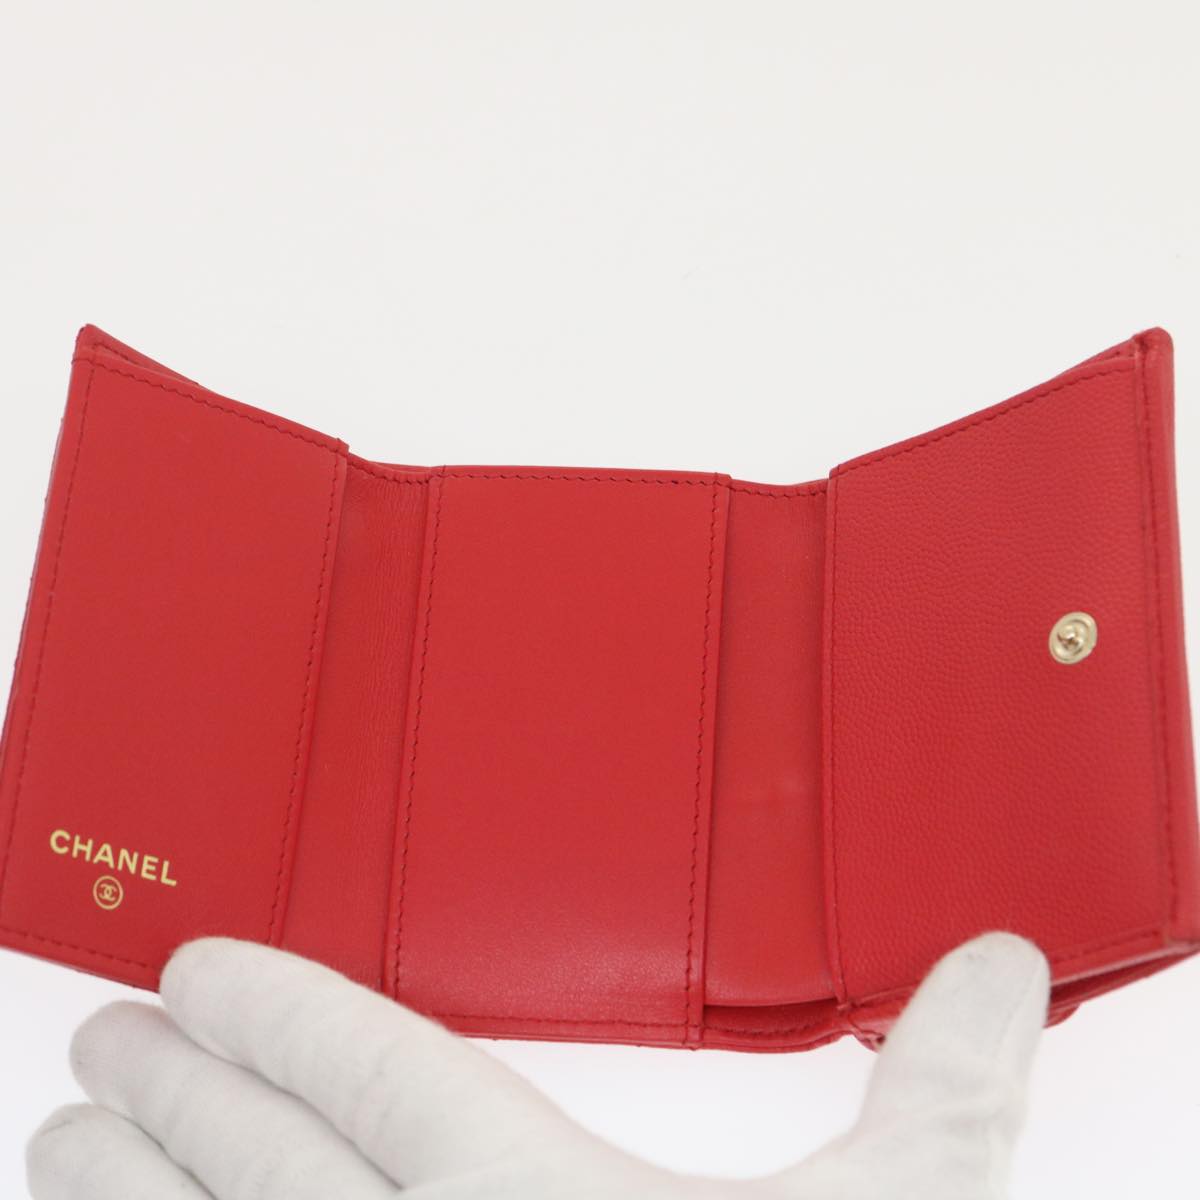 Chanel Red Leather CC Wallet